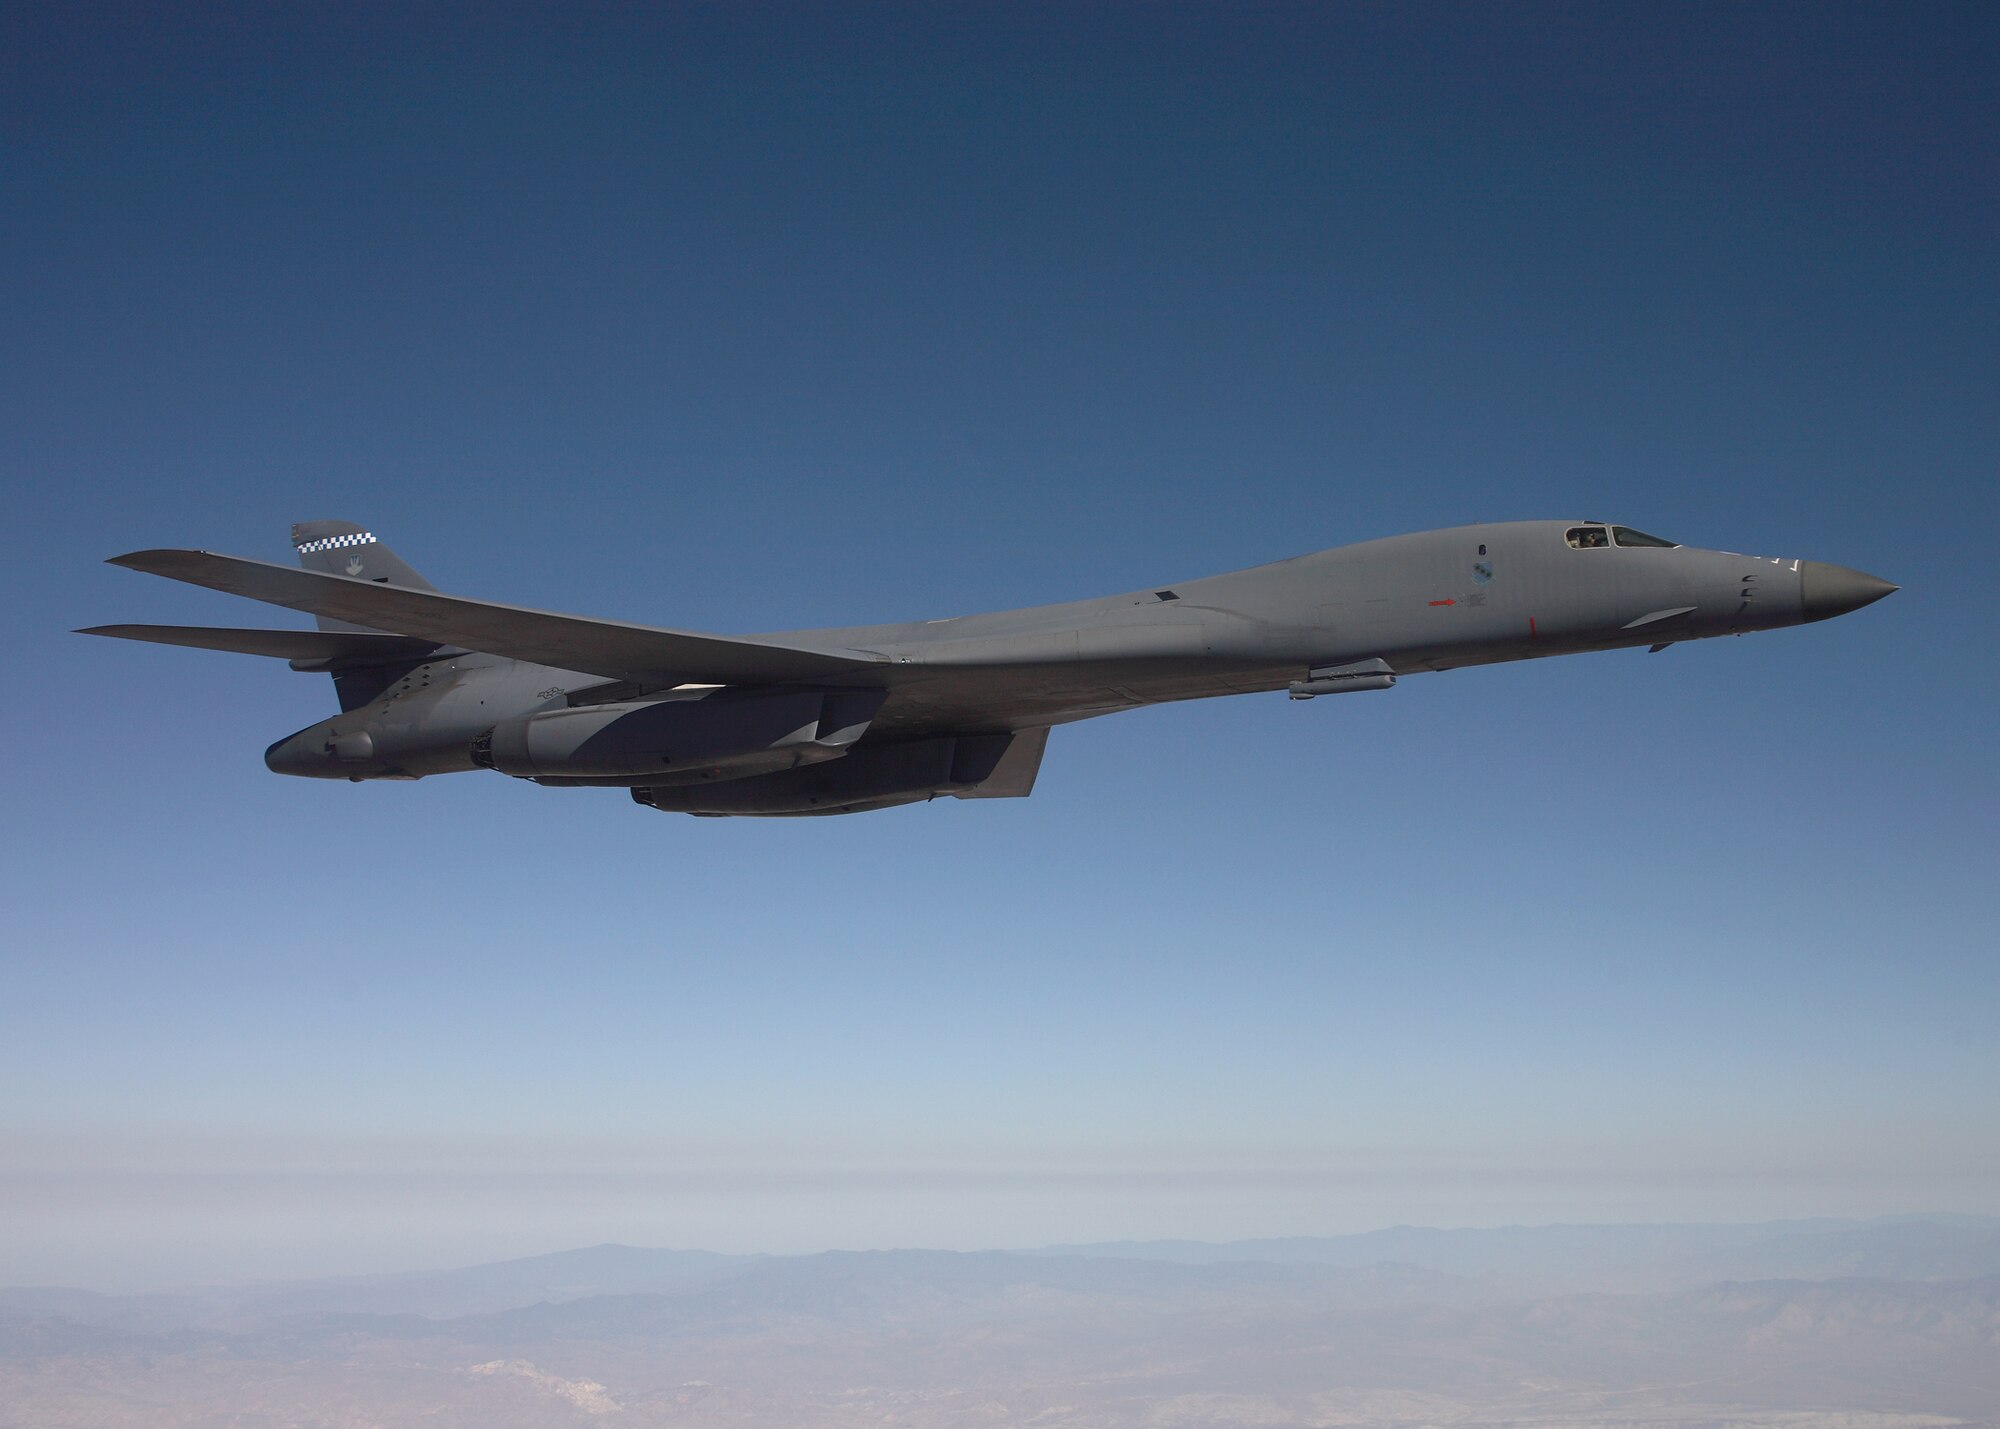 A B-1B Lancer flies on a testing mission carrying a sniper pod. The sniper pod is scheduled to be fully operational by summer. (Air Force photo by Jet Fabara)